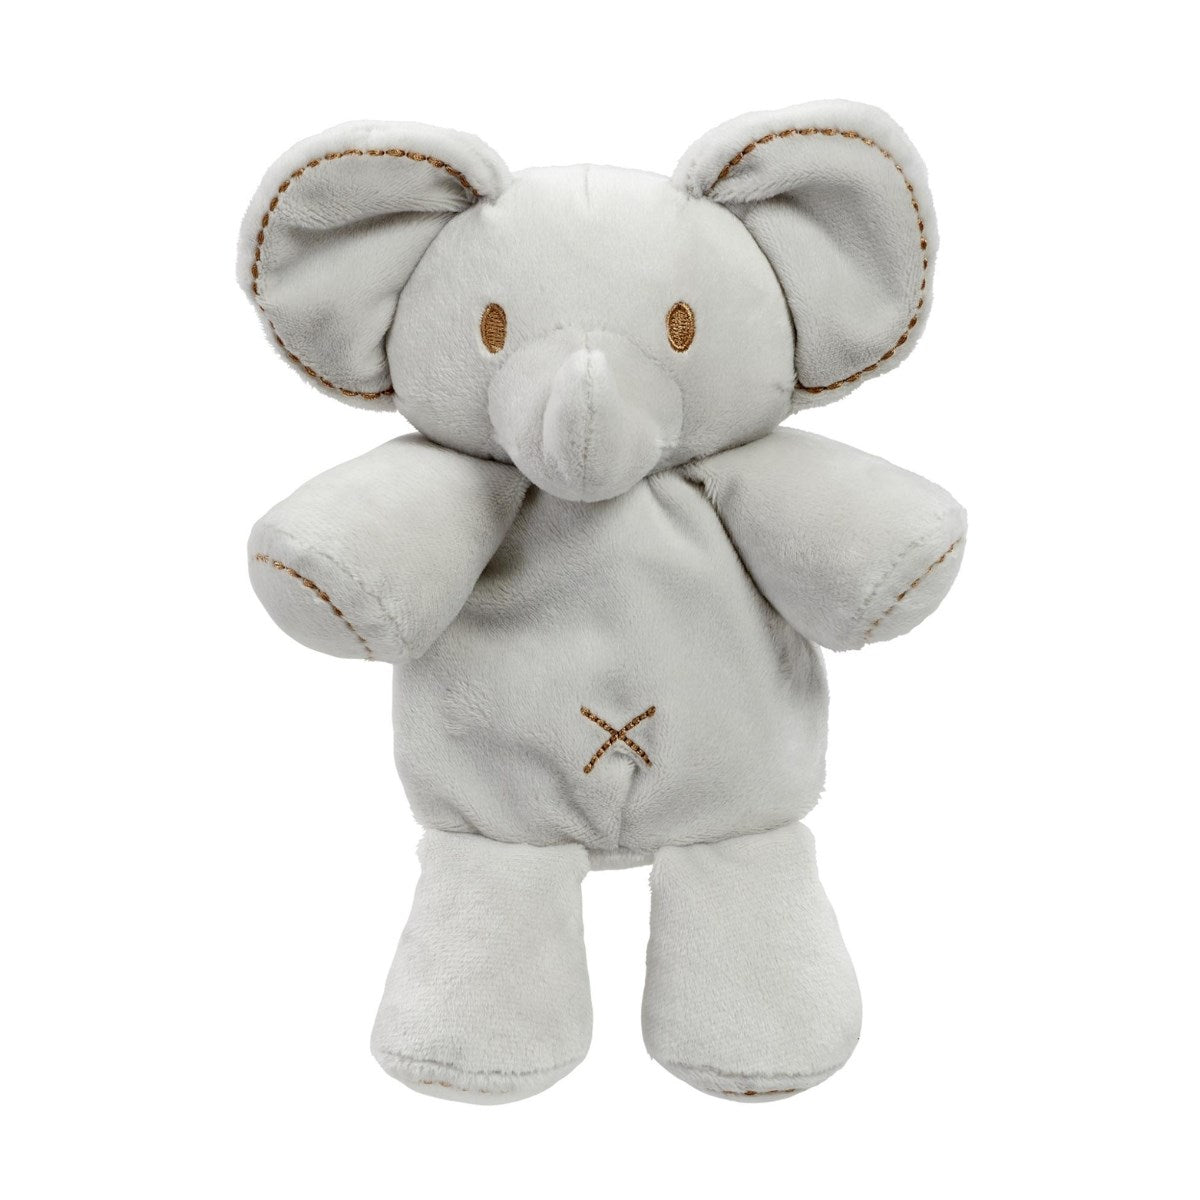 Grey elephant soft toy with brown embroidery